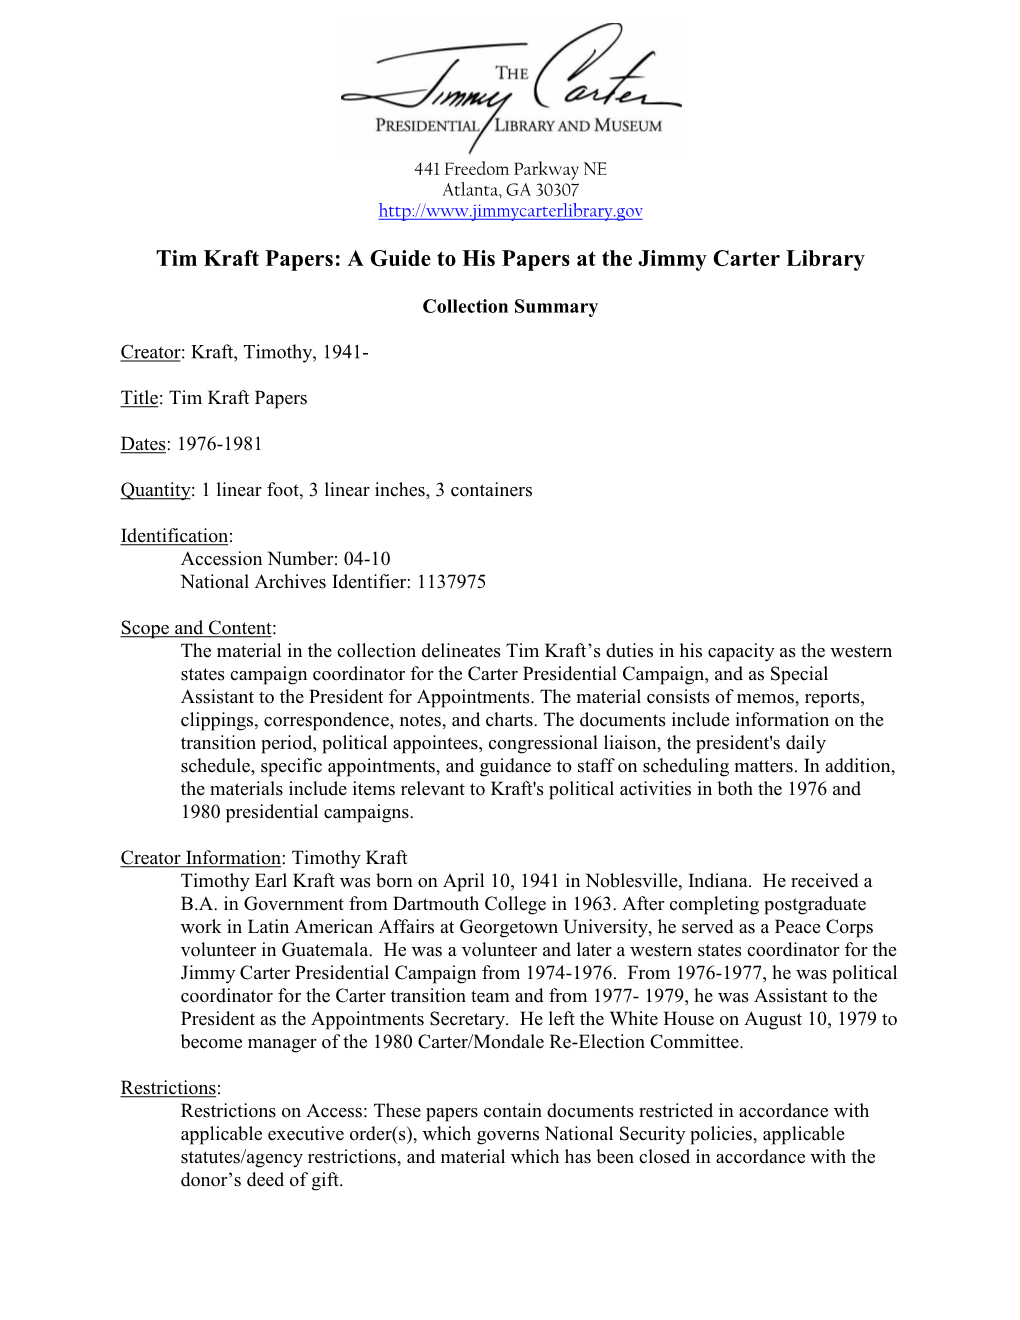 Tim Kraft Papers: a Guide to His Papers at the Jimmy Carter Library